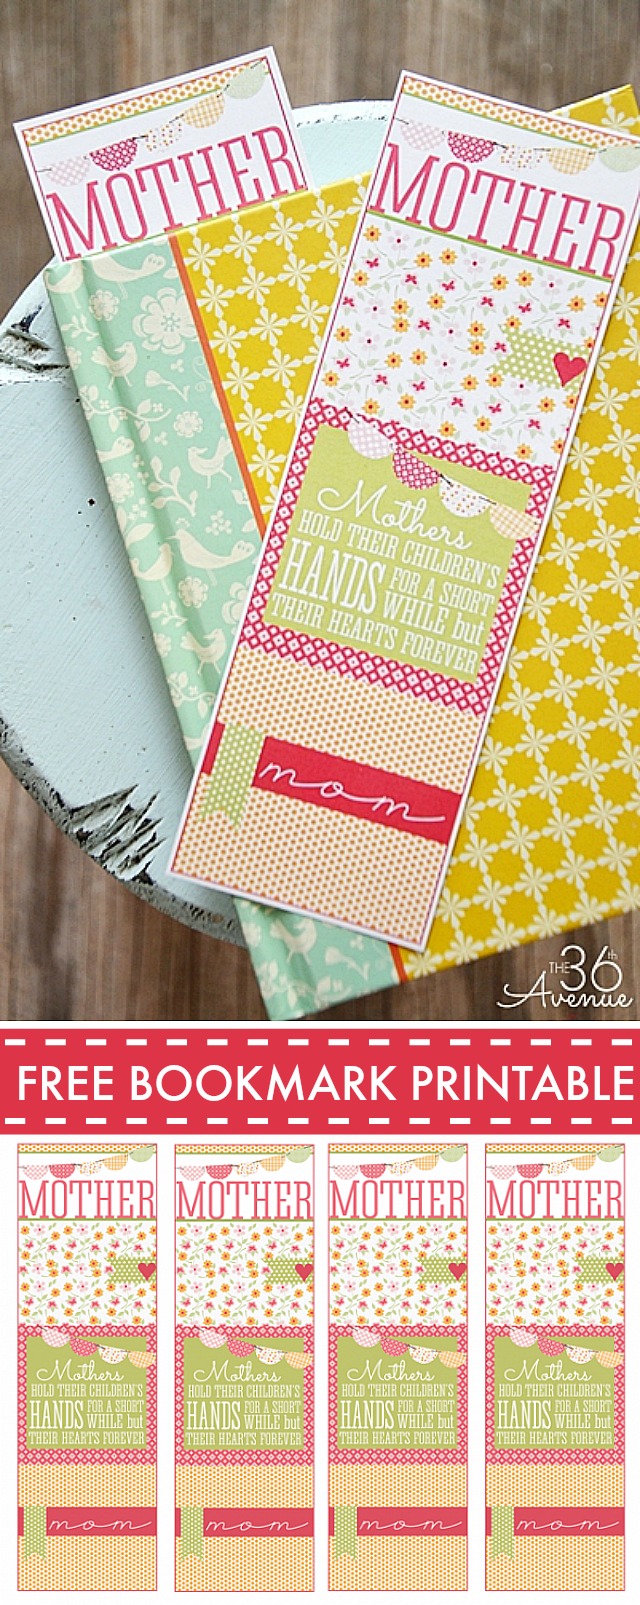 Handmade Gifts - Free Bookmark Printable at the36thavenue.com PIN IT now and PRINT IT later!